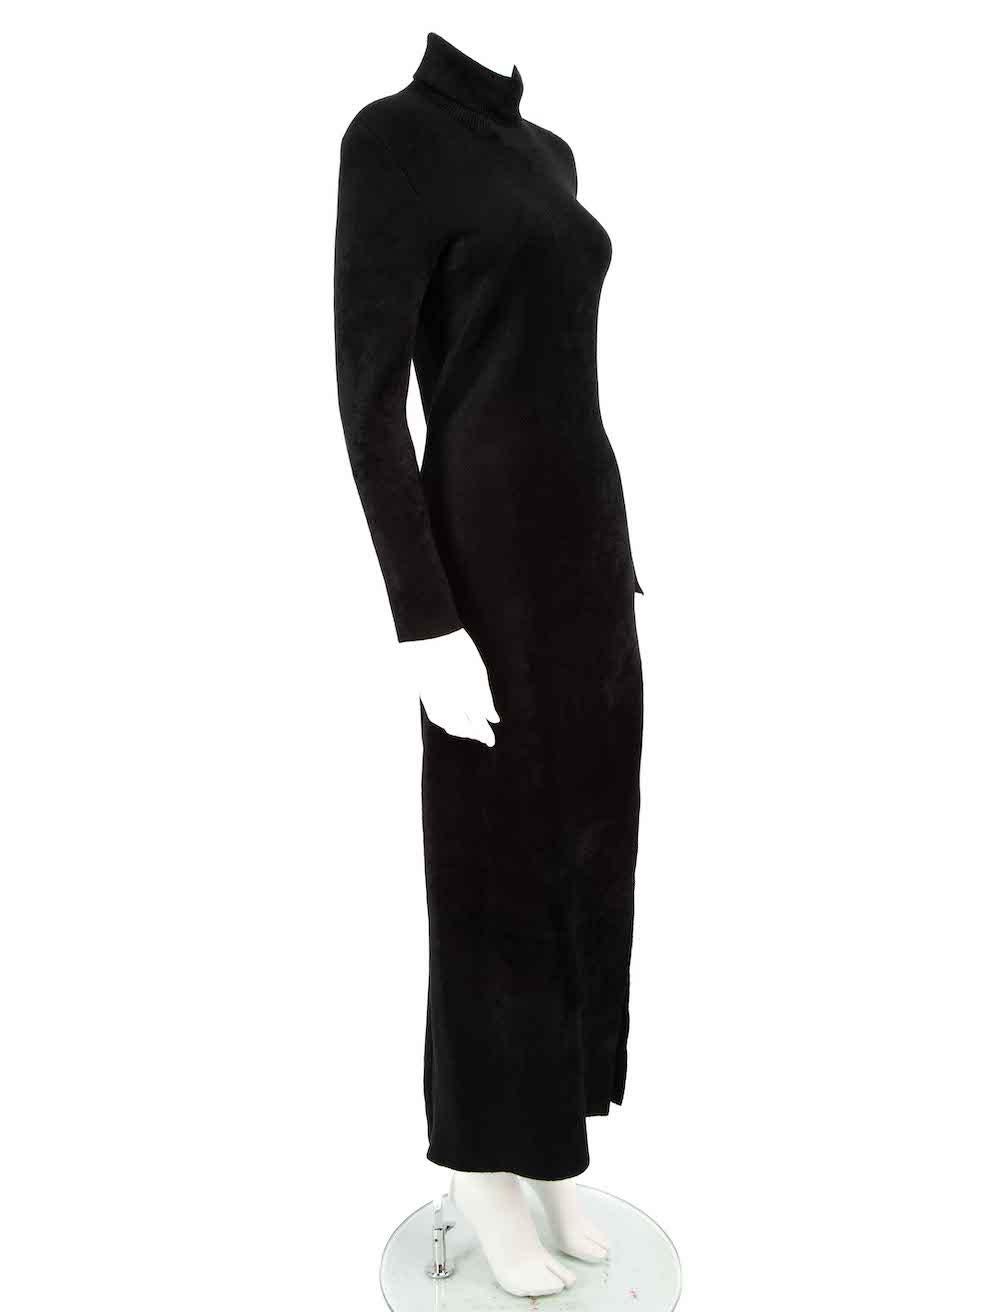 CONDITION is Very good. Hardly any visible wear to dress is evident on this used Balenciaga designer resale item.
 
 
 
 Details
 
 
 Black
 
 Viscose
 
 Dress
 
 Stretchy
 
 Maxi
 
 Turtleneck
 
 Long sleeves
 
 Side leg slit
 
 Logo shoulder tab
